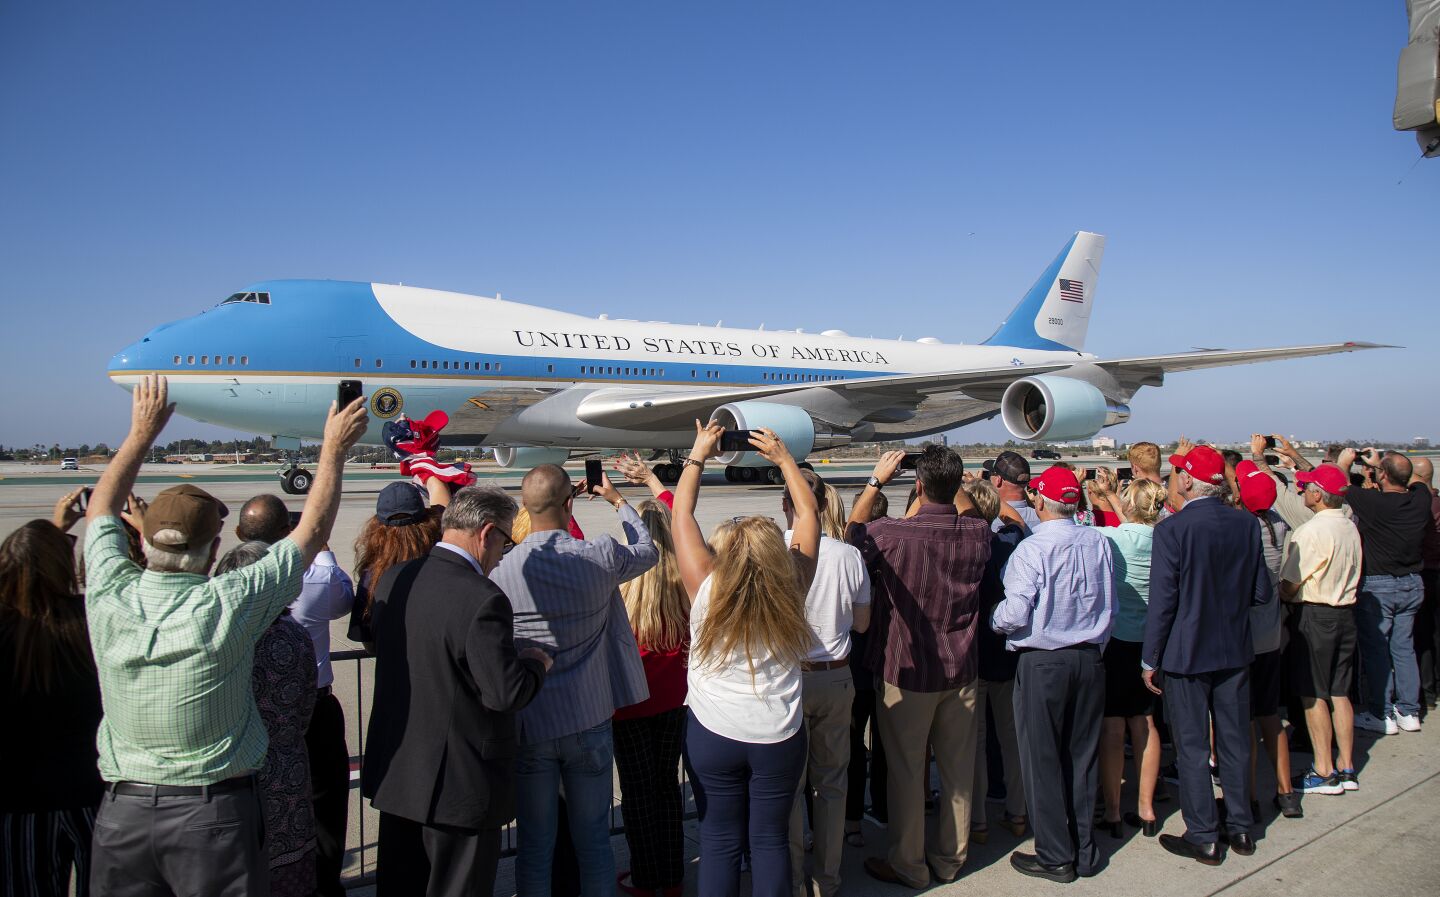 President Trump supporters wave as Air Force One taxies along the runway after landing at LAX.